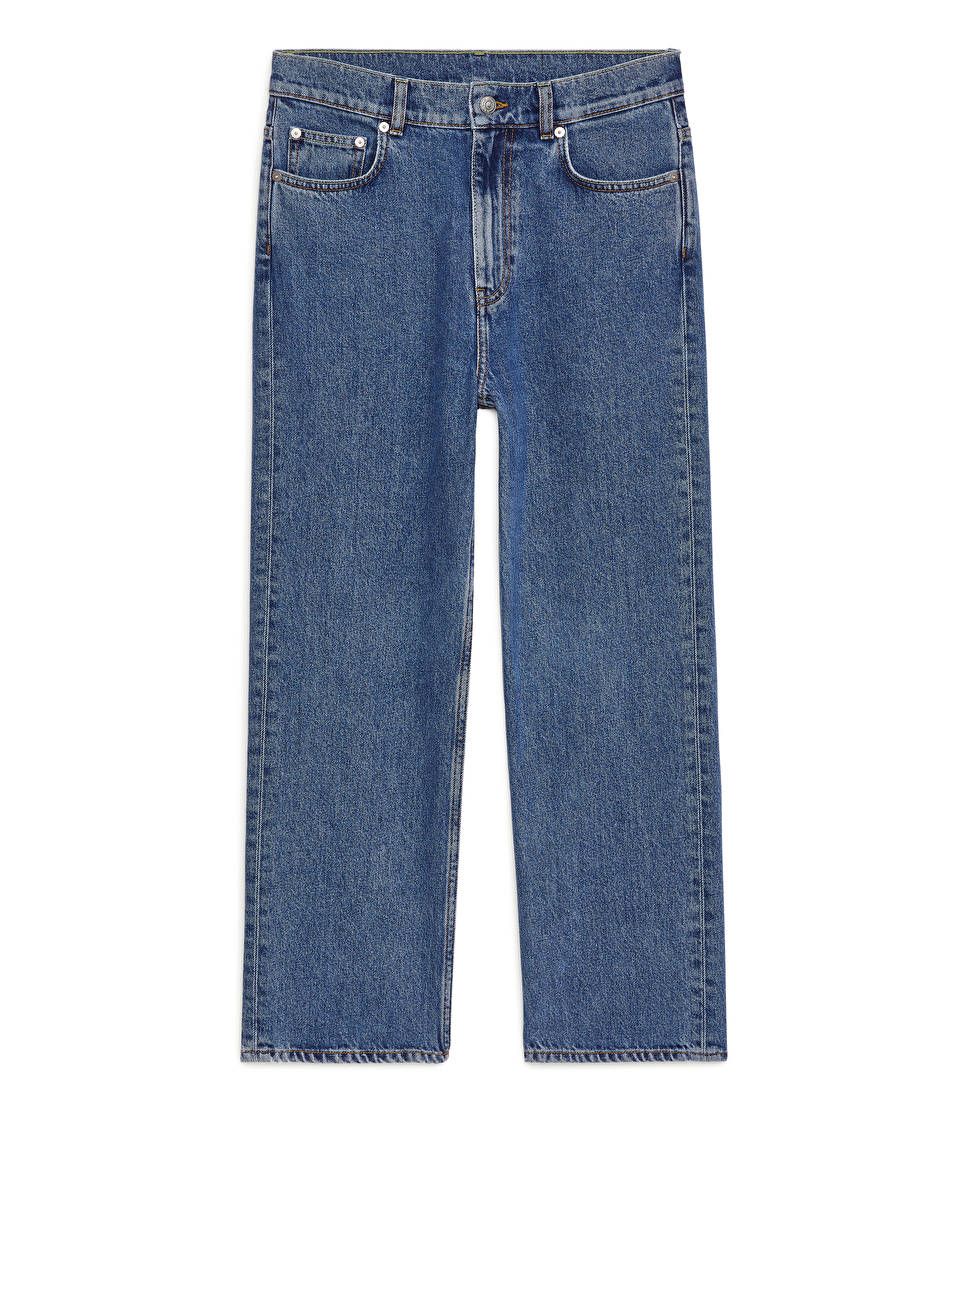 STRAIGHT CROPPED Jeans | ARKET